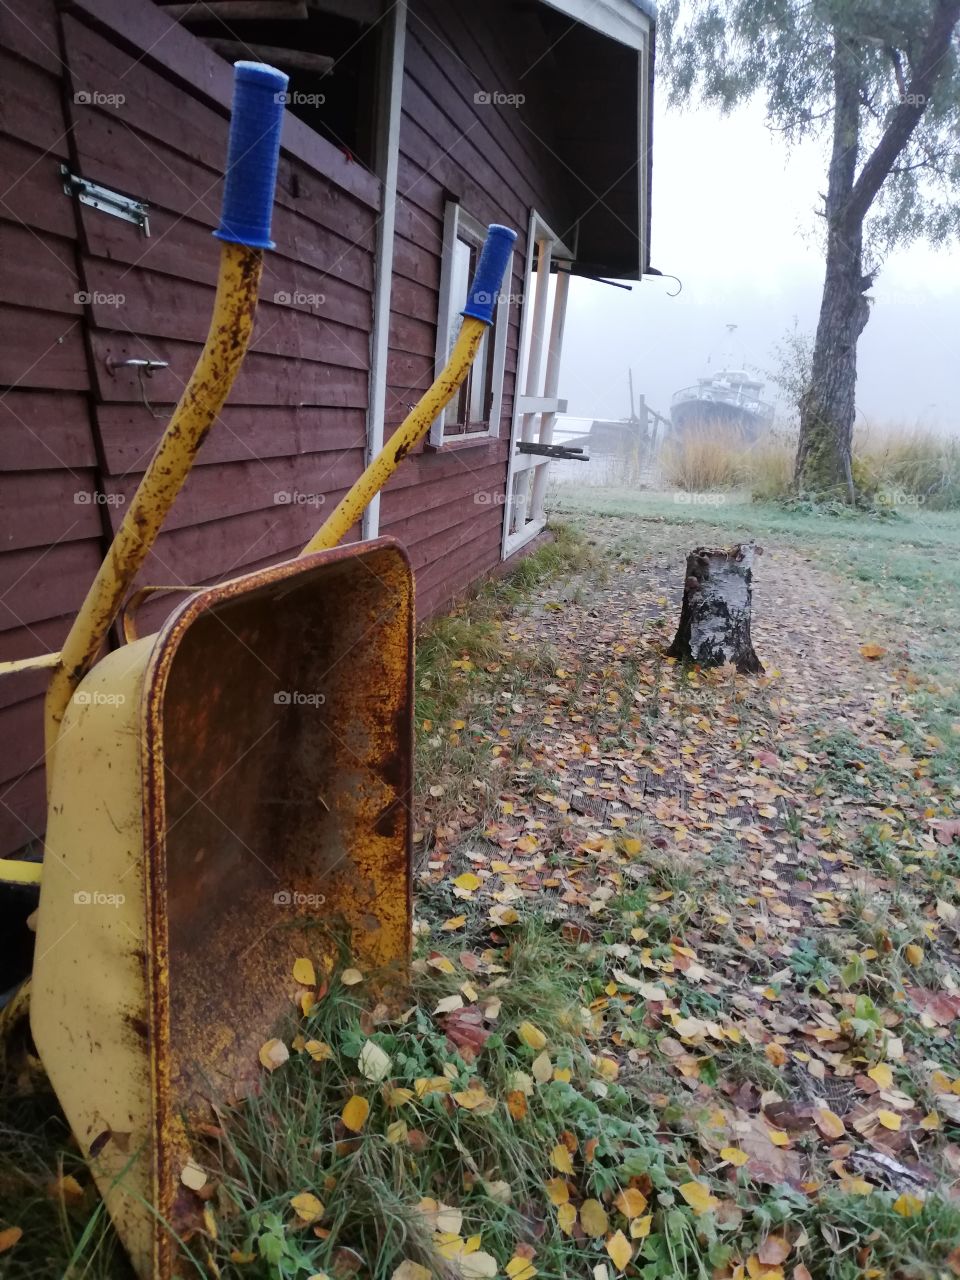 A yellow rusty wheelbarrow on the side of a red lake side sauna. The building is made of board, the window frames and the edge of the roof are white. The fallen birch leaves around the stump.